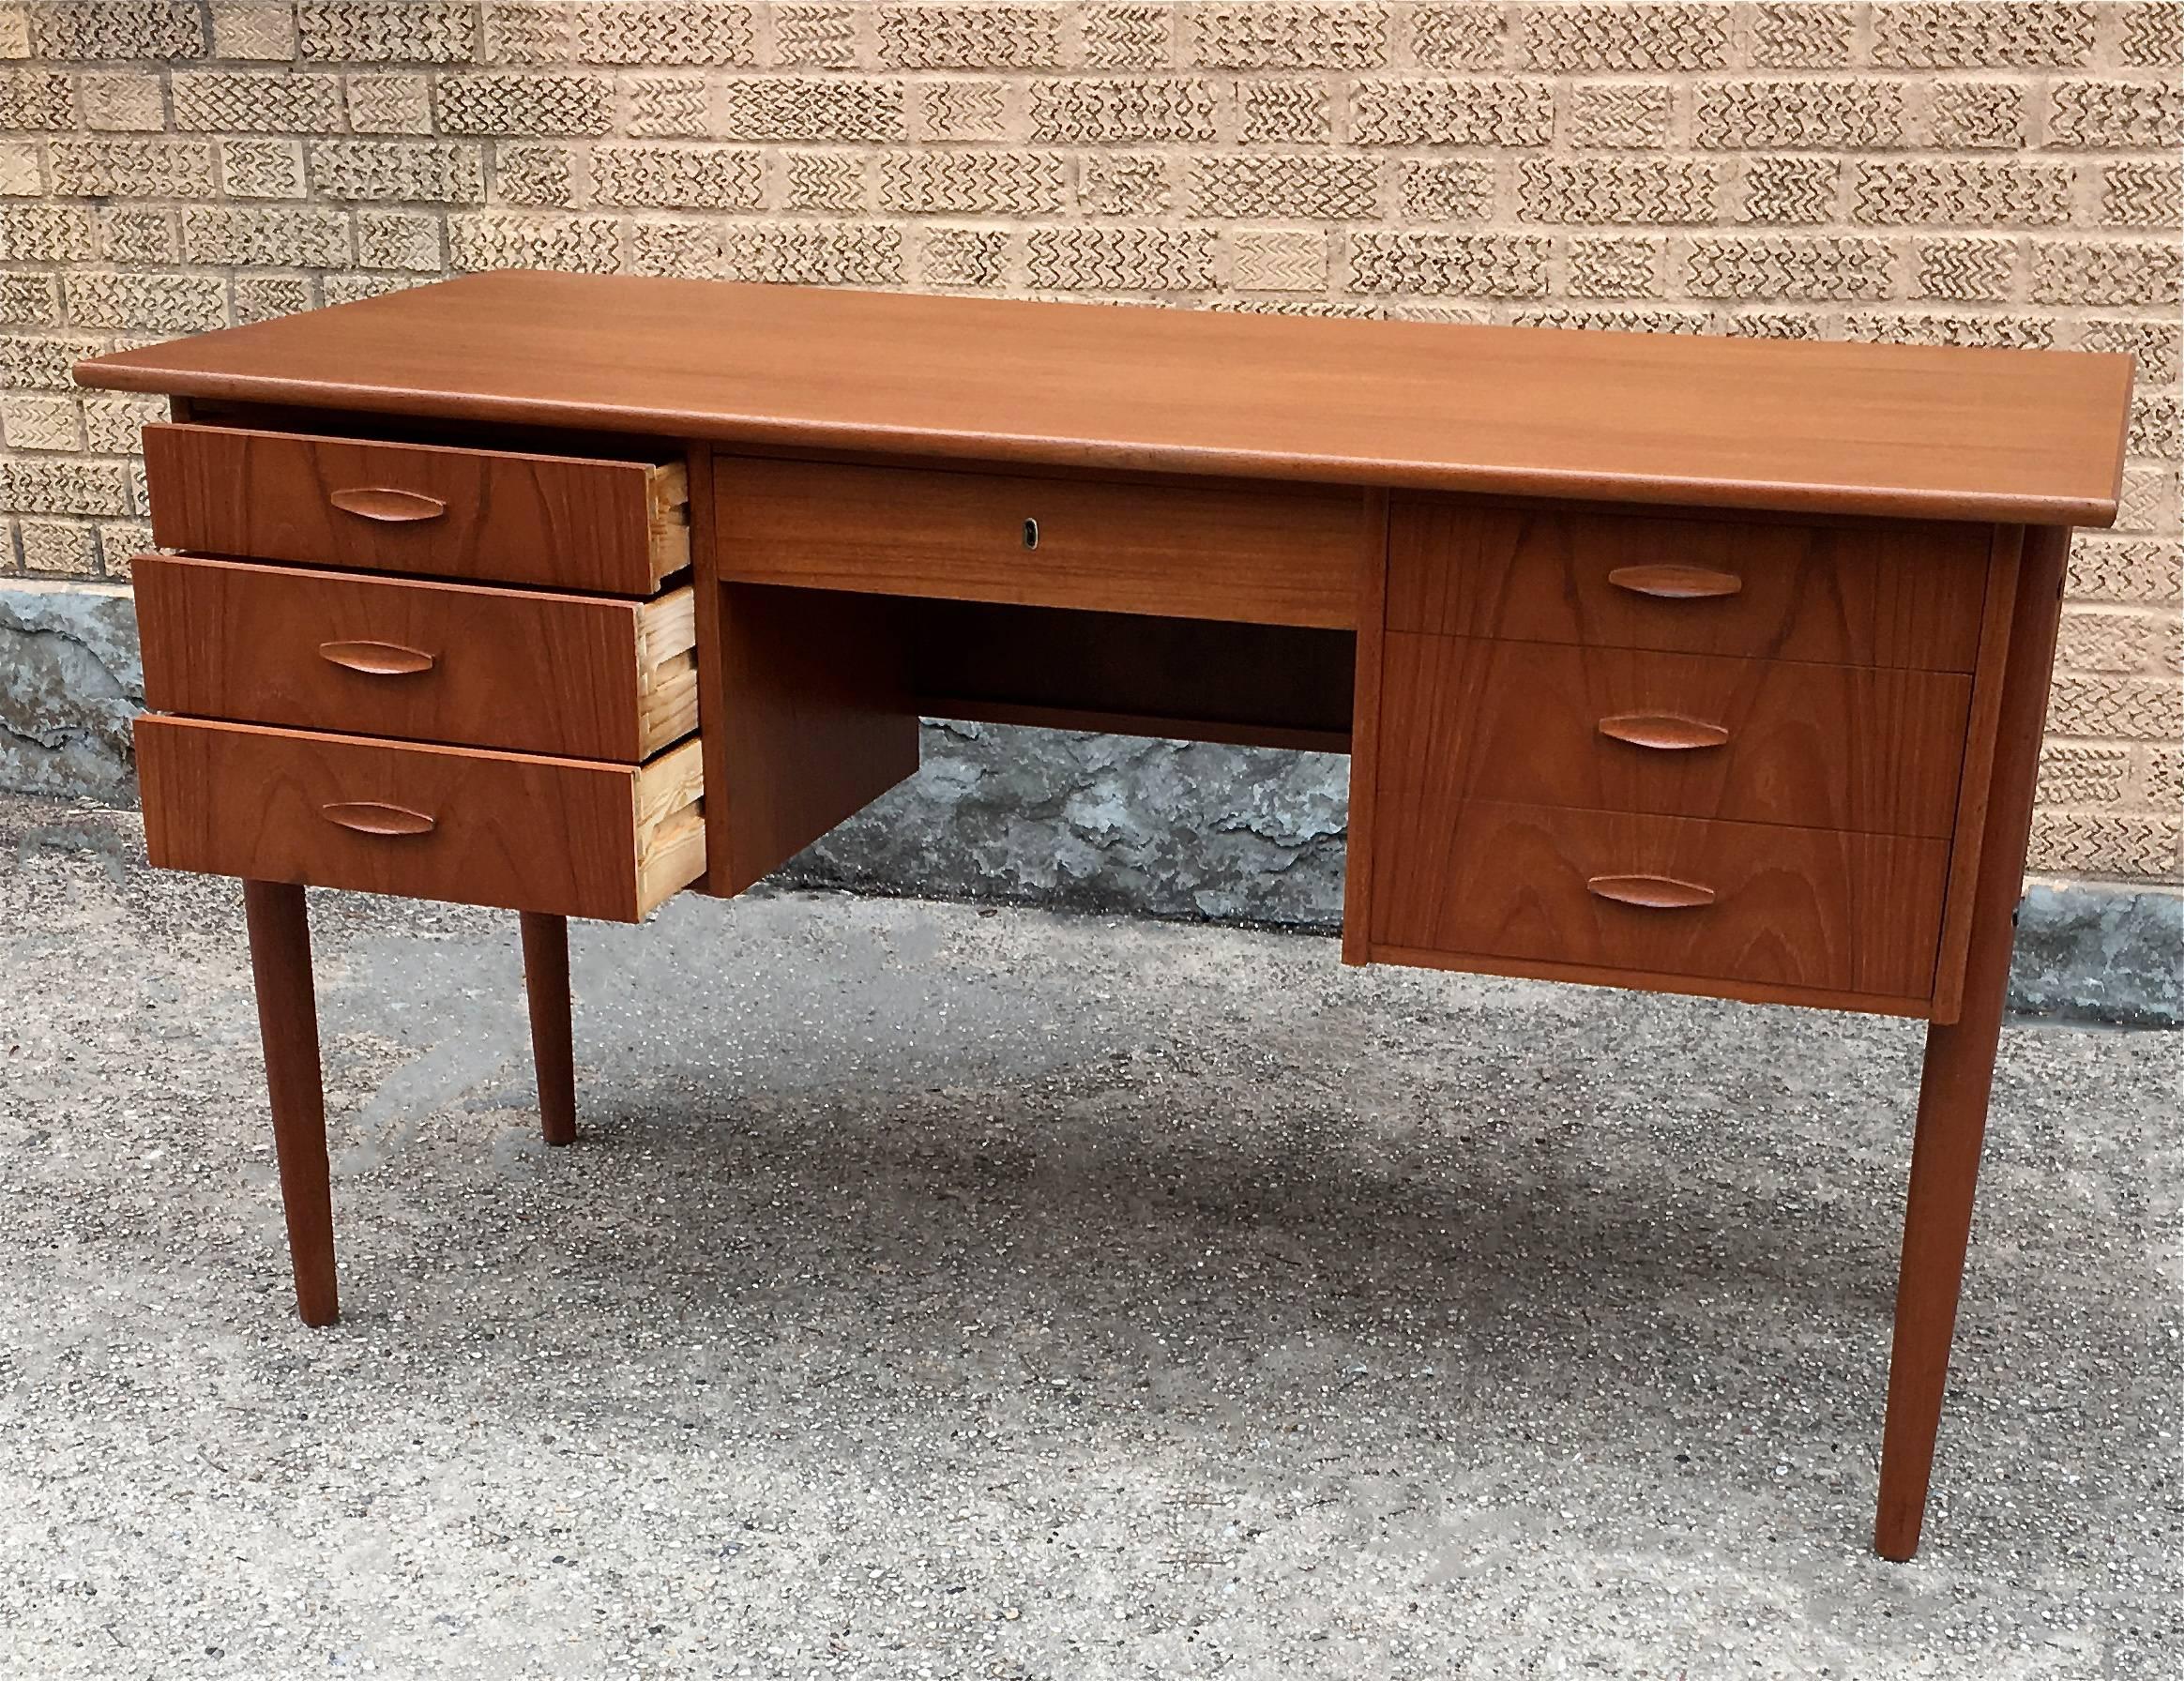 Danish modern, teak desk has storage on either side and a drawer in the middle. The desk features a finished front with an open shelf for display or books. The sitting clearance is 17 inches w x 25 inches ht.

                              